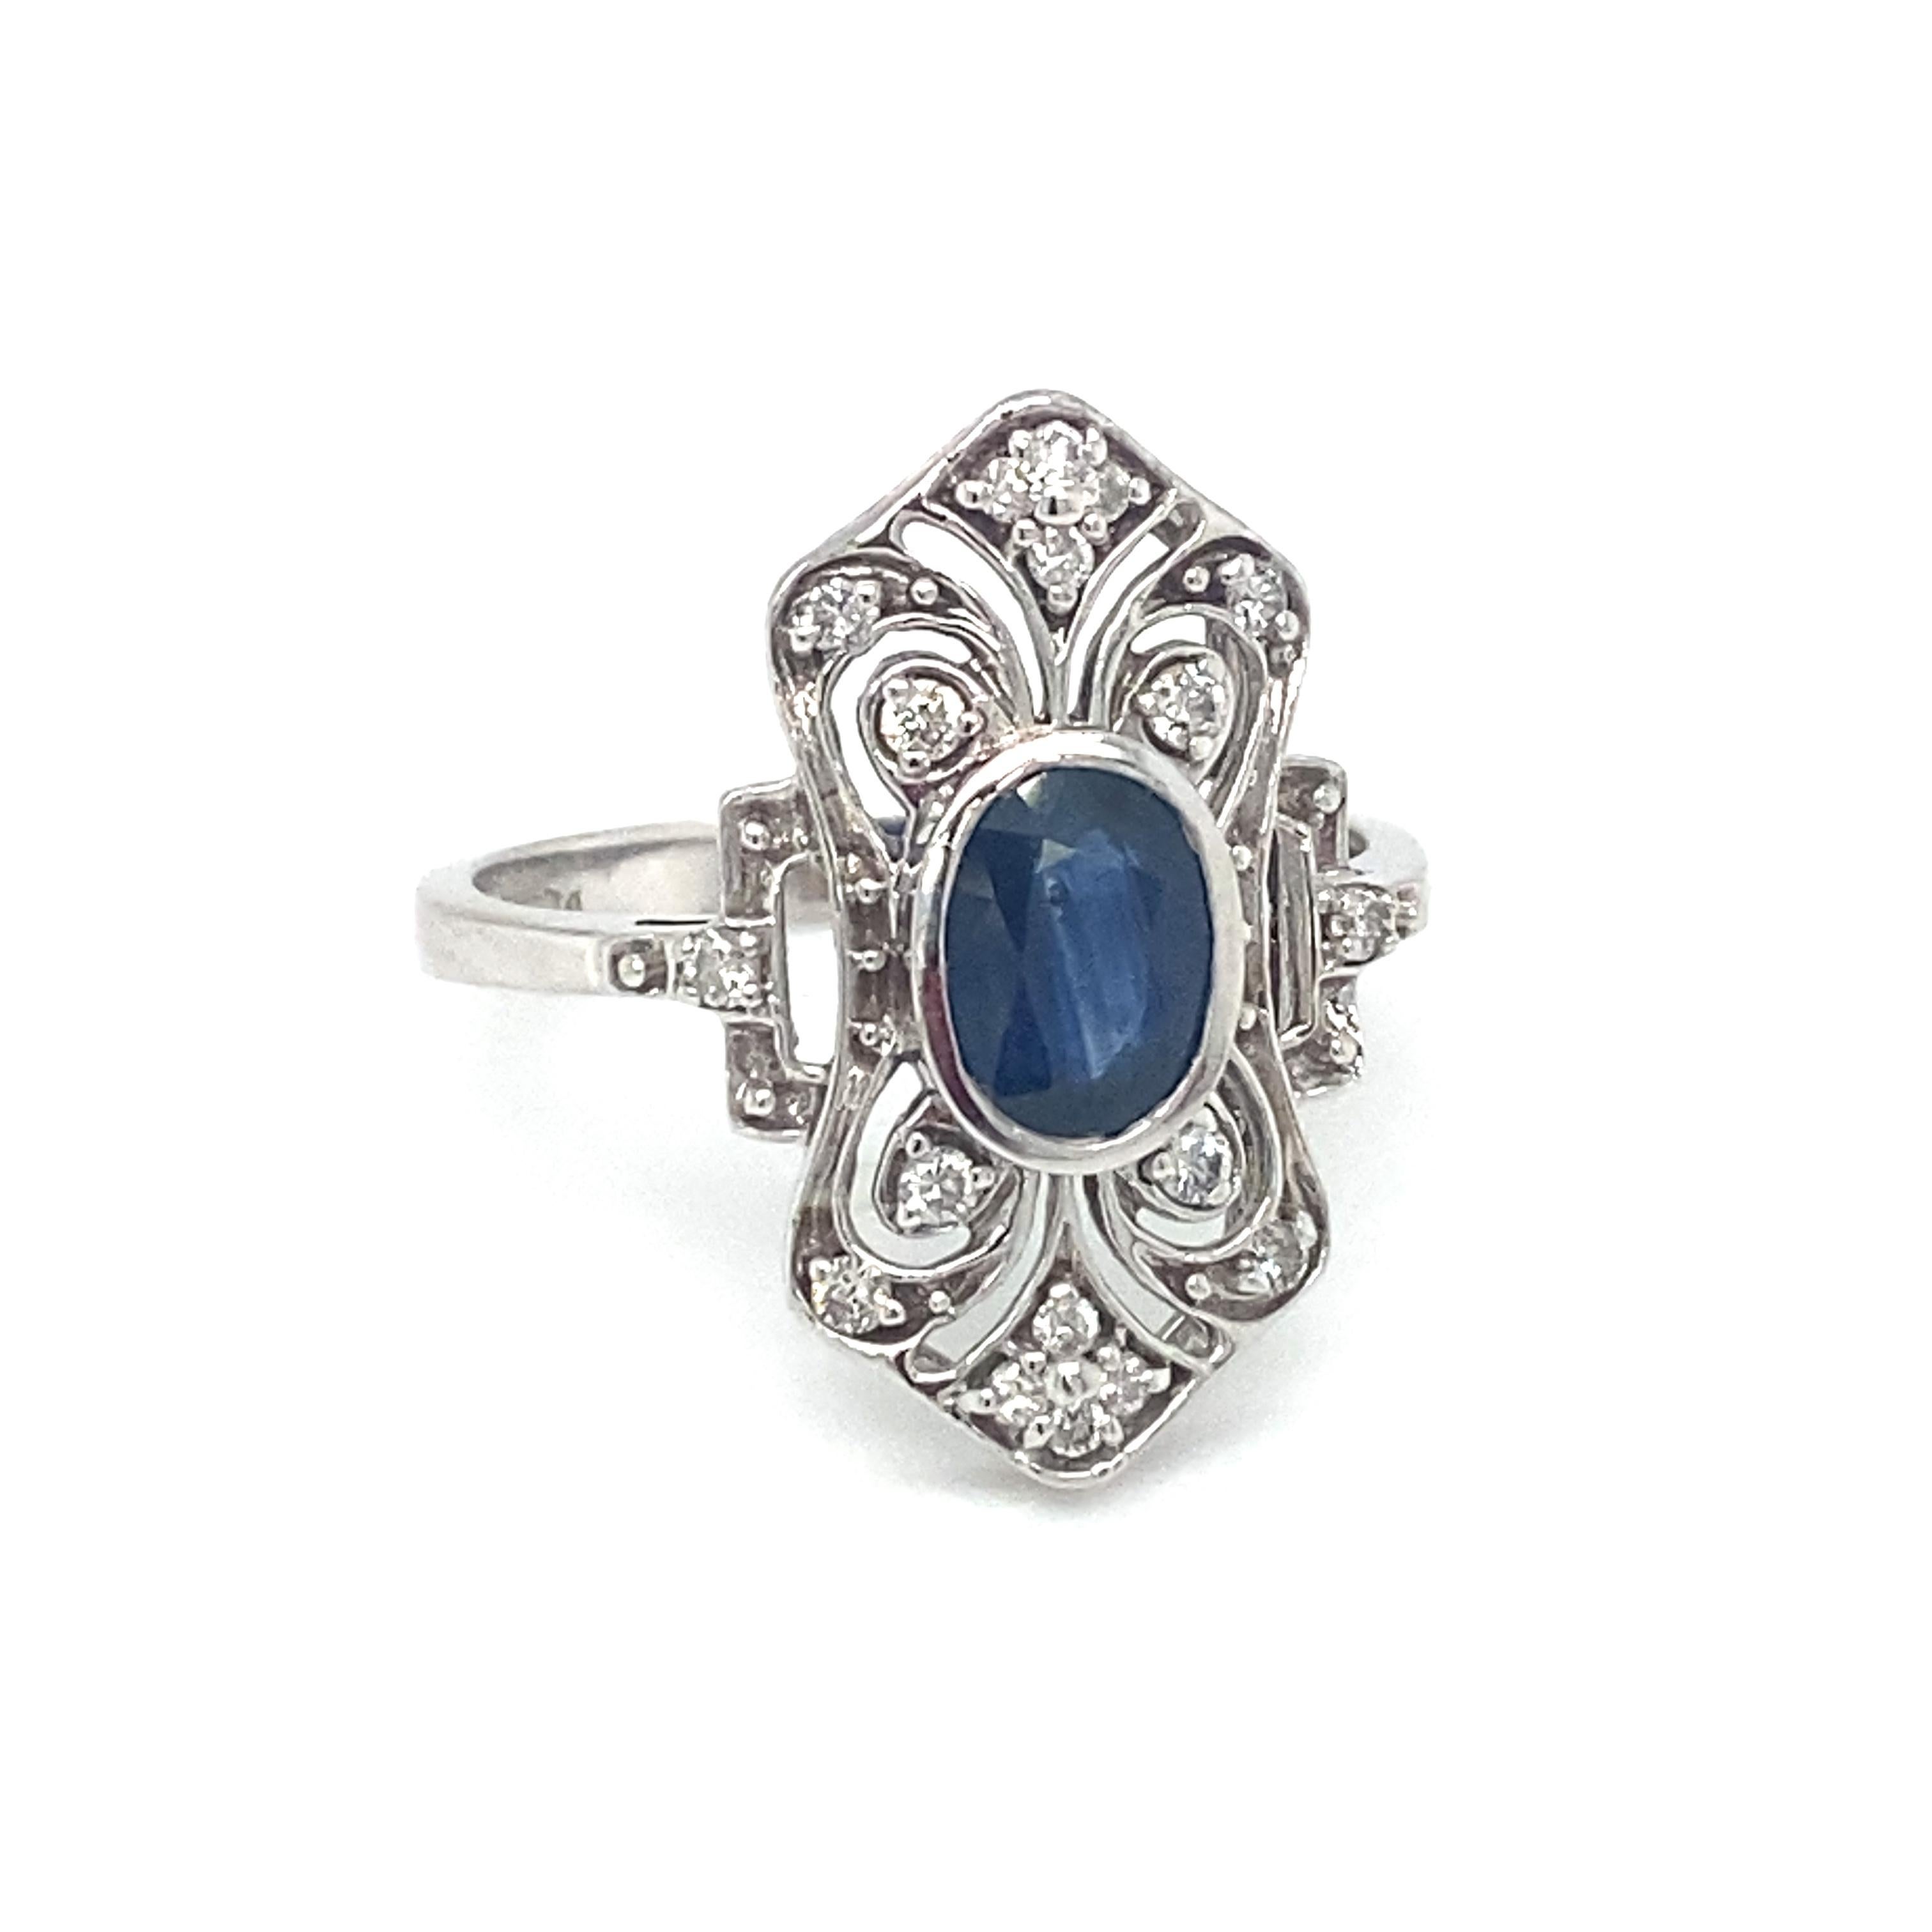 Circa 1950s Art Deco Style Sapphire and Diamond Cocktail Ring in 14K White Gold In Excellent Condition For Sale In Atlanta, GA